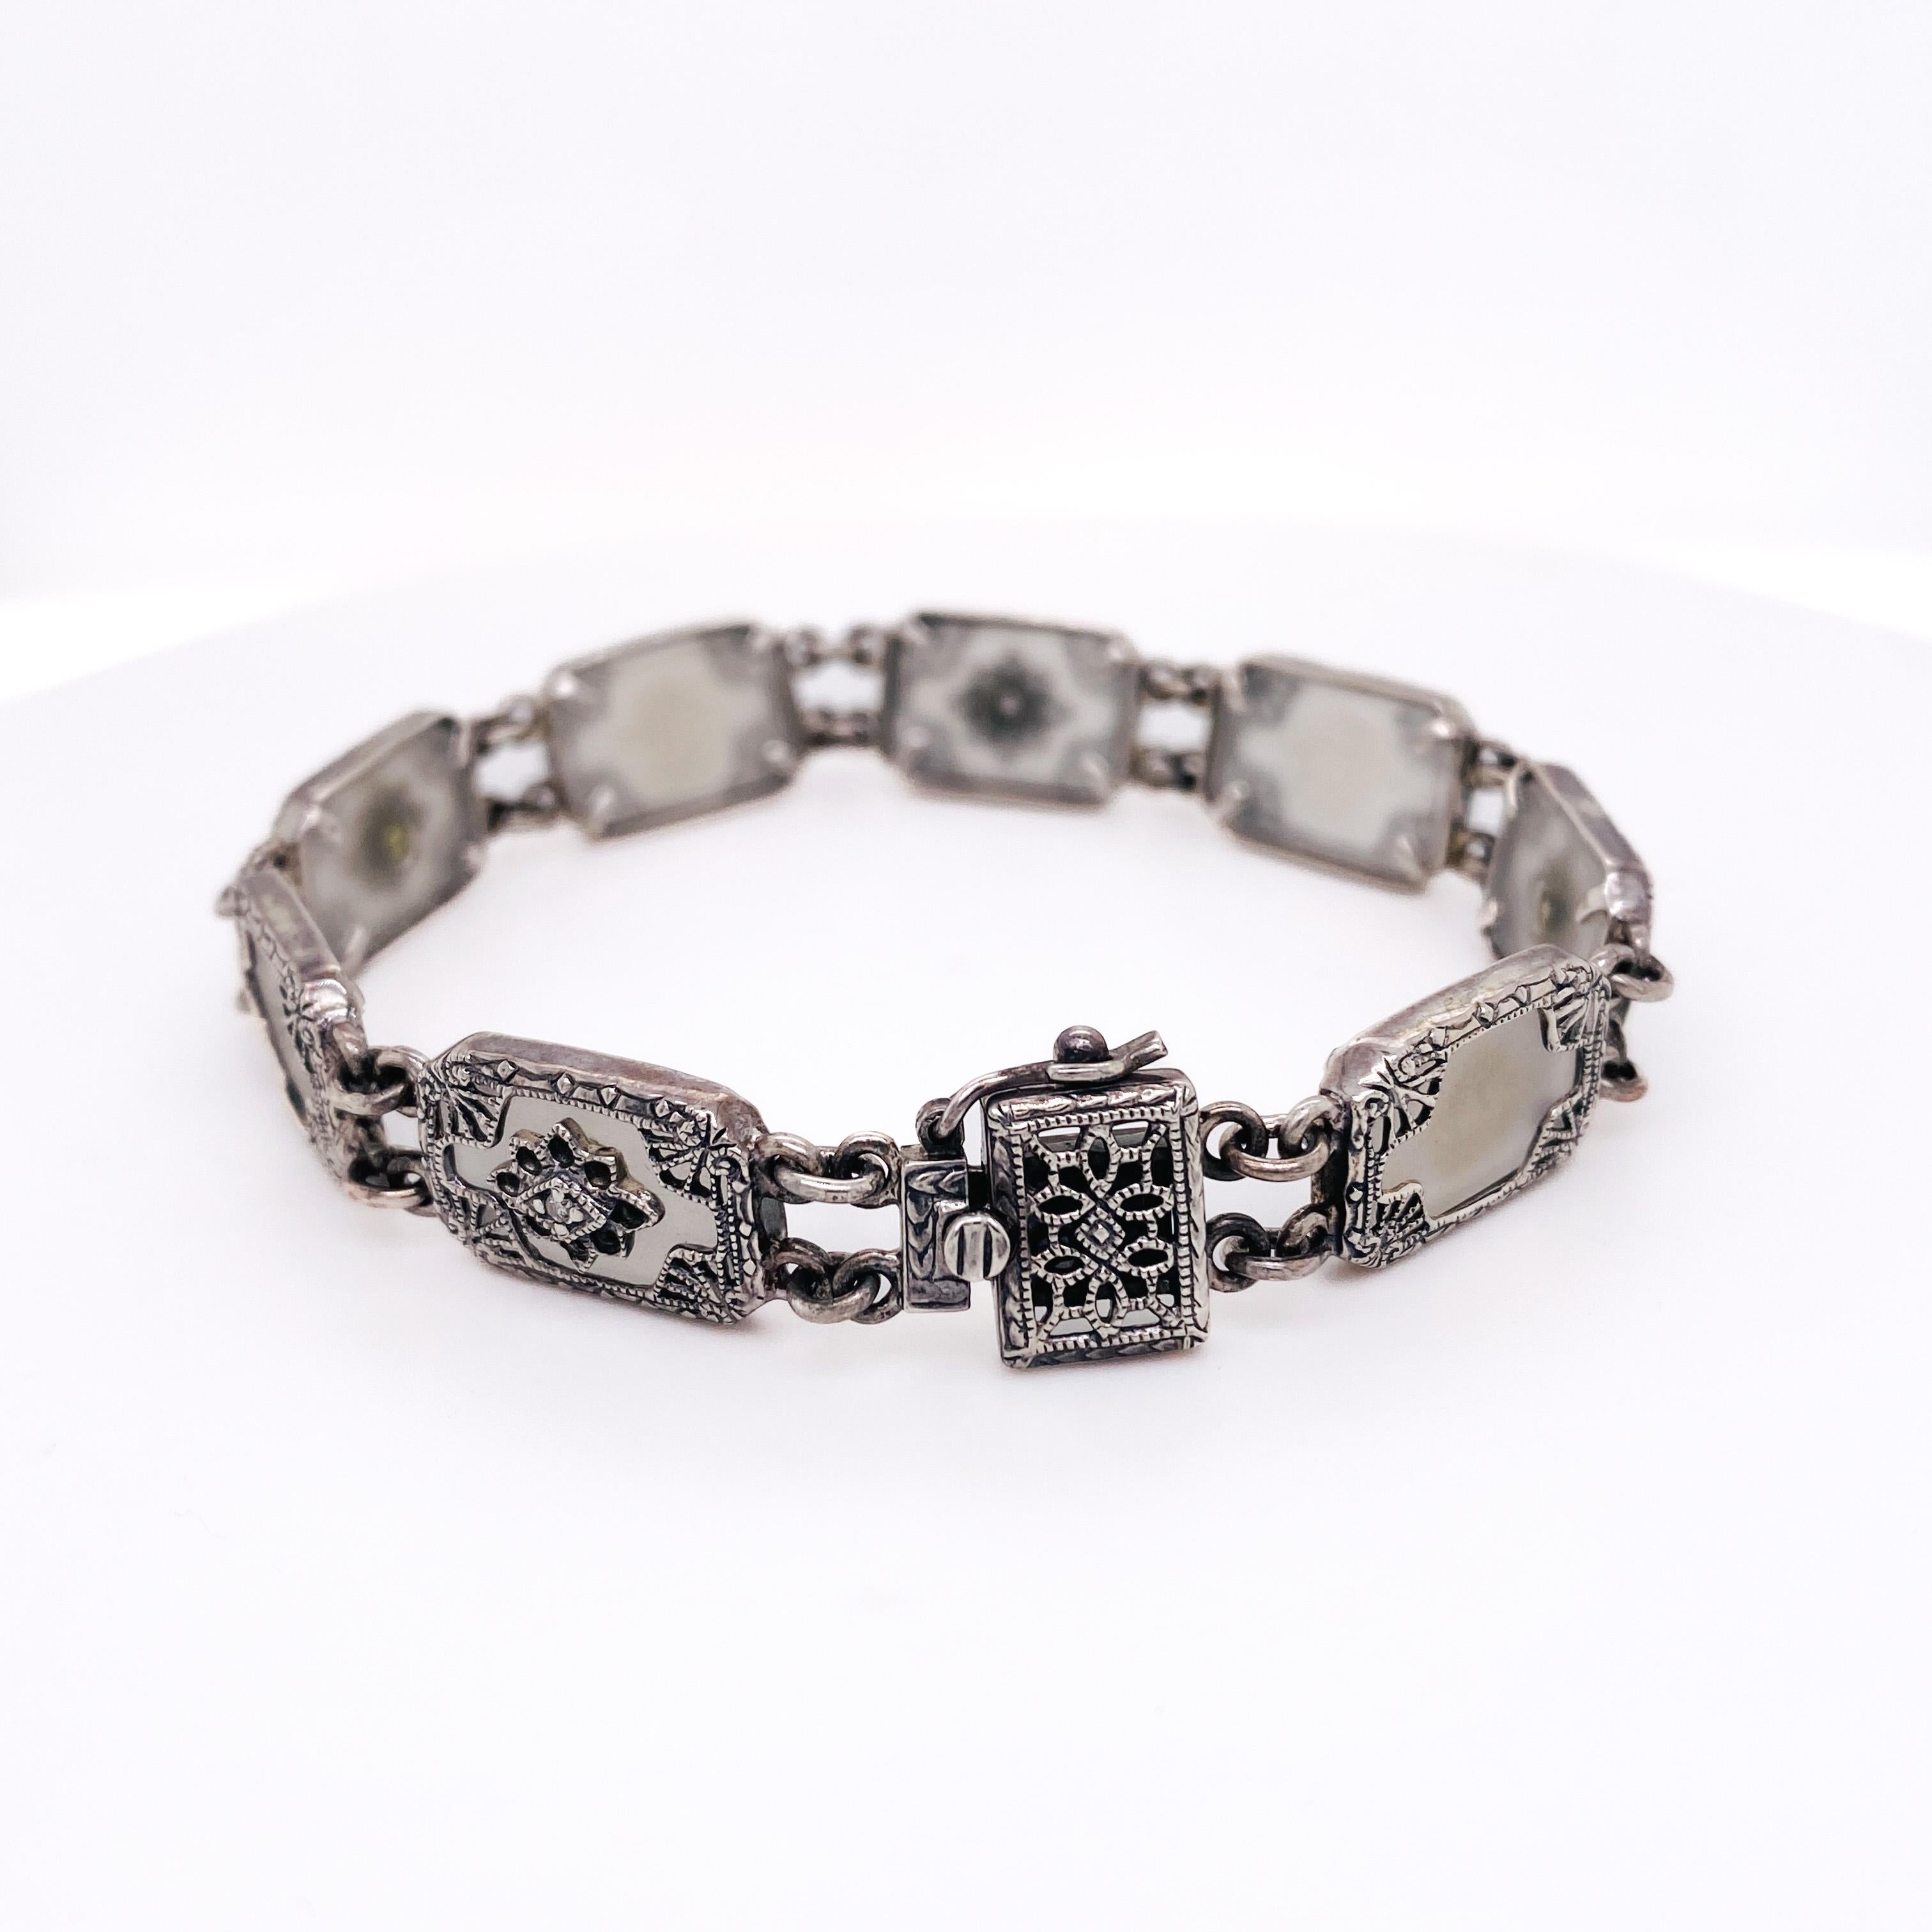 The perfect addition to any vintage jewelry collection! This unique bracelet has handmade sterling silver links with a filigree design on each that encases a piece of agate chalcedony. Chalcedony is known for representing nurturing qualities and